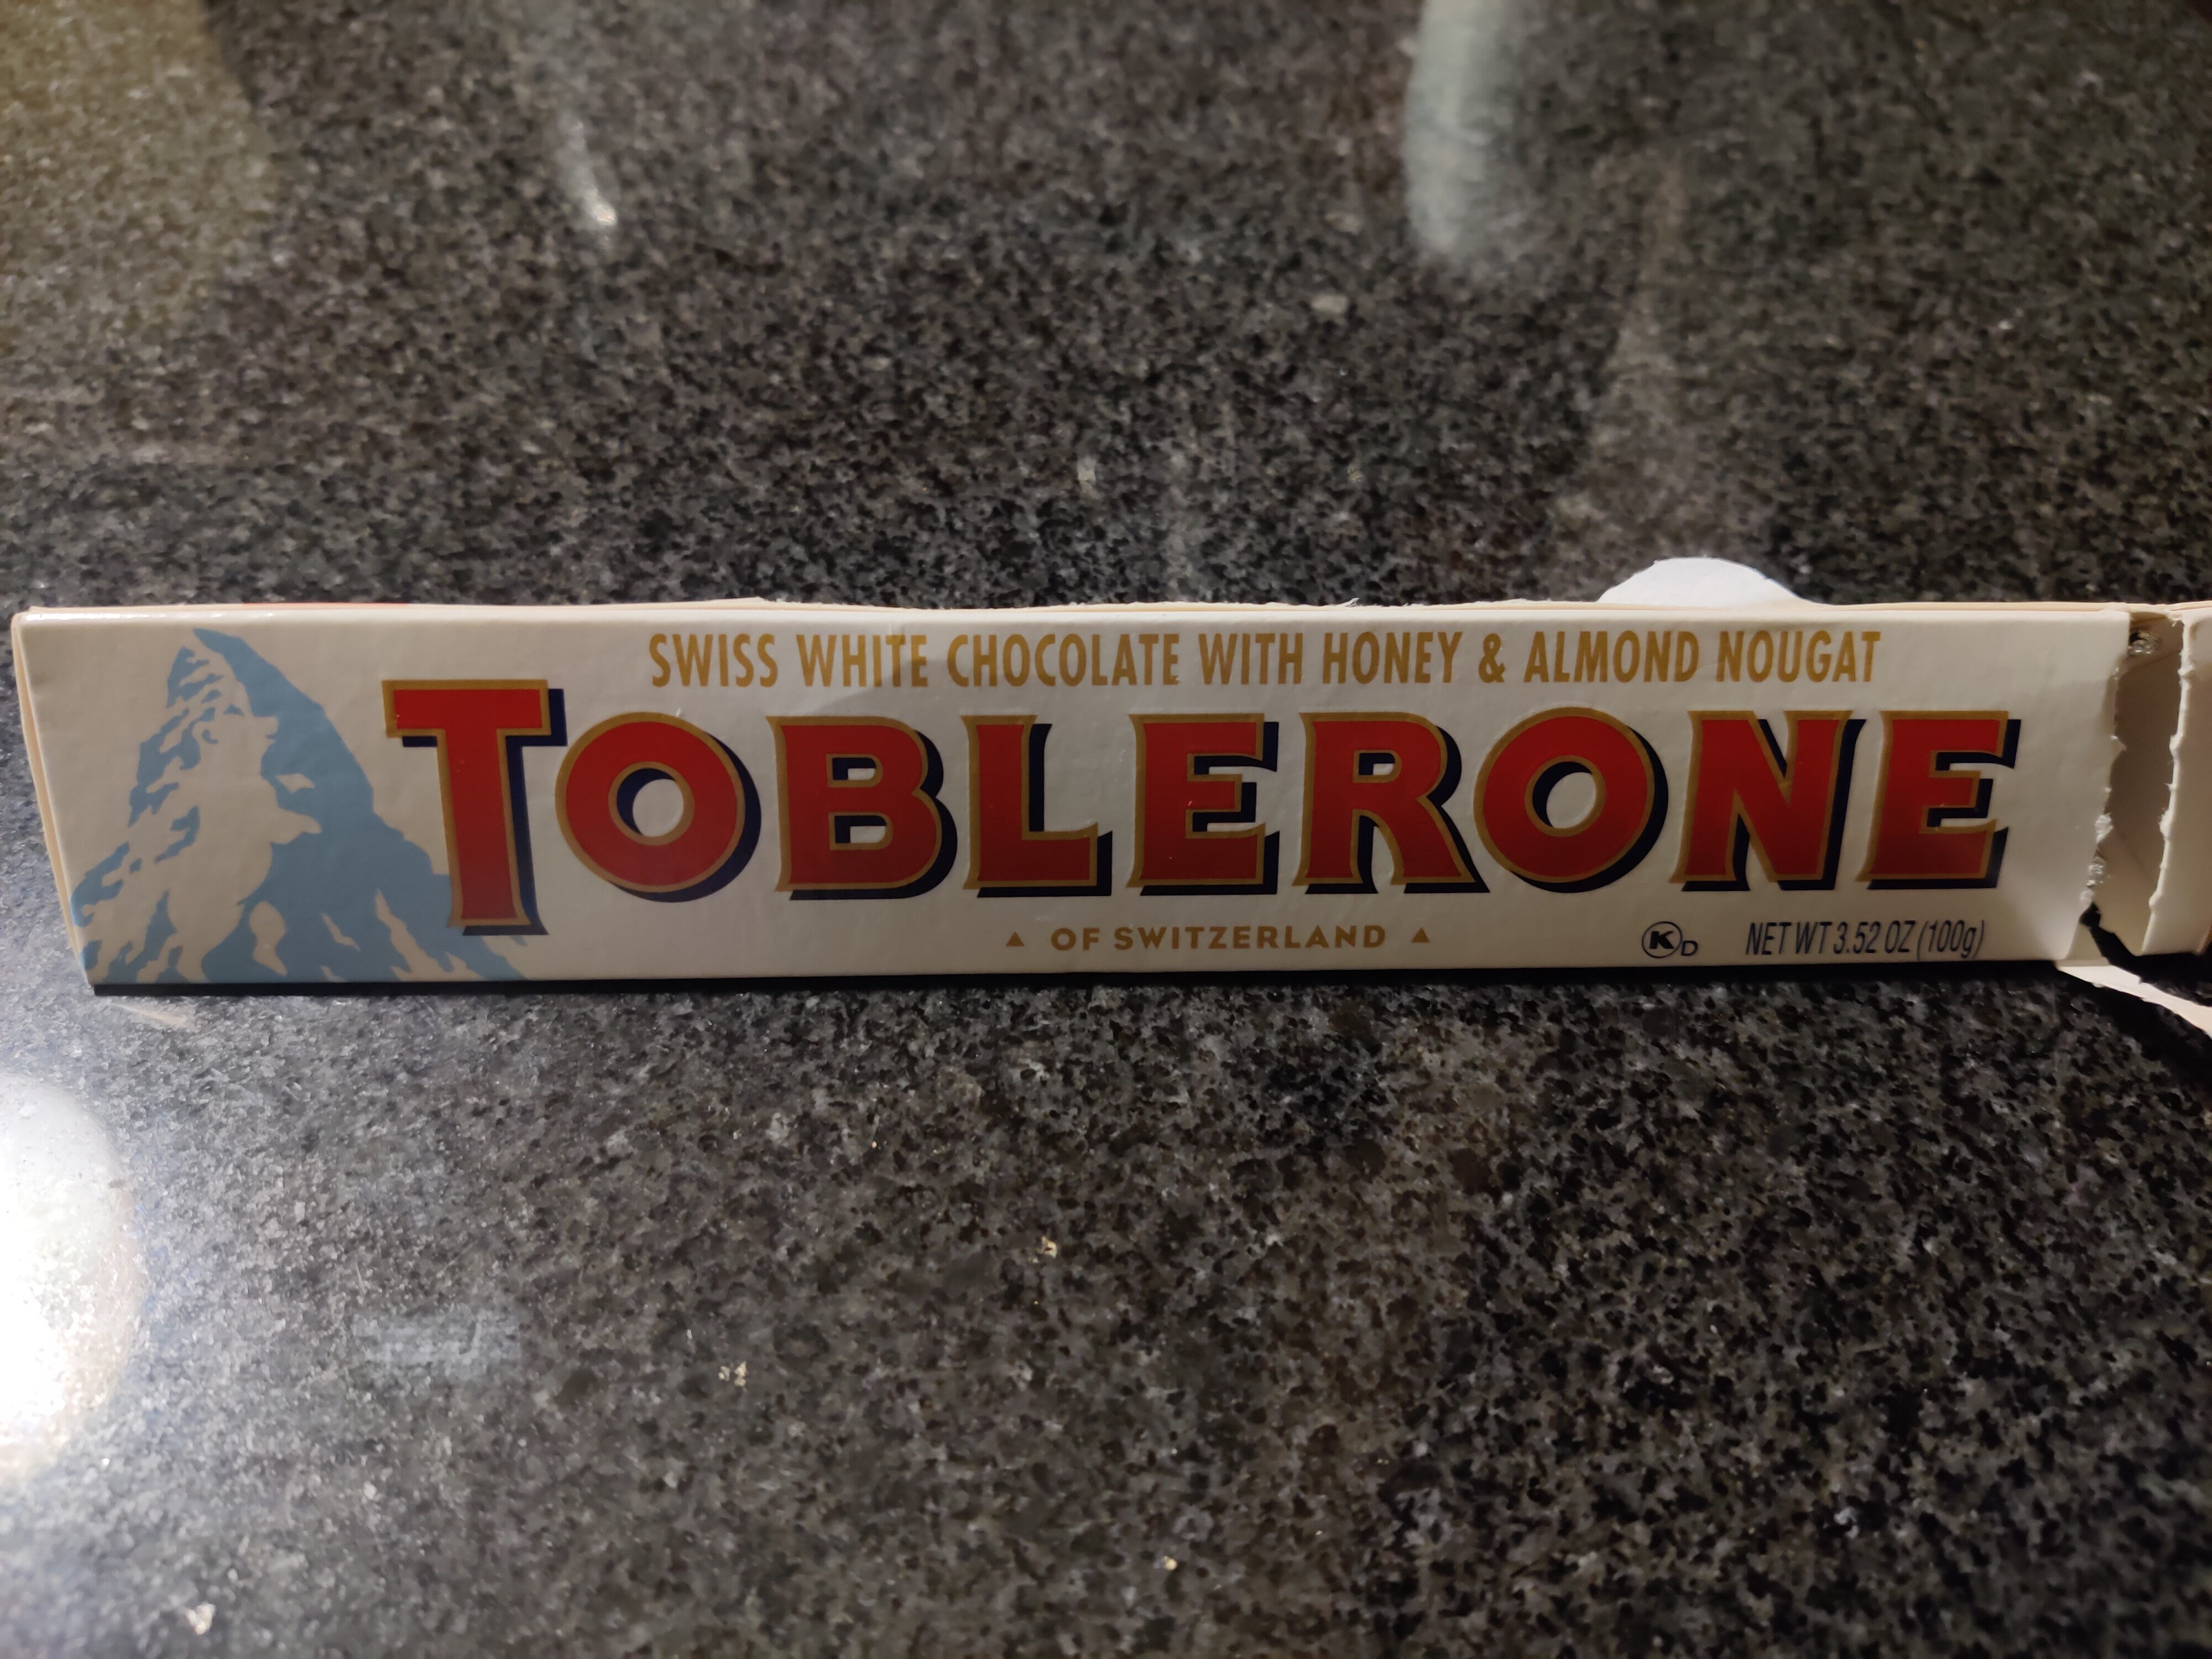 Toblerone, swiss white chocolate with honey & almond nougat - Product - en